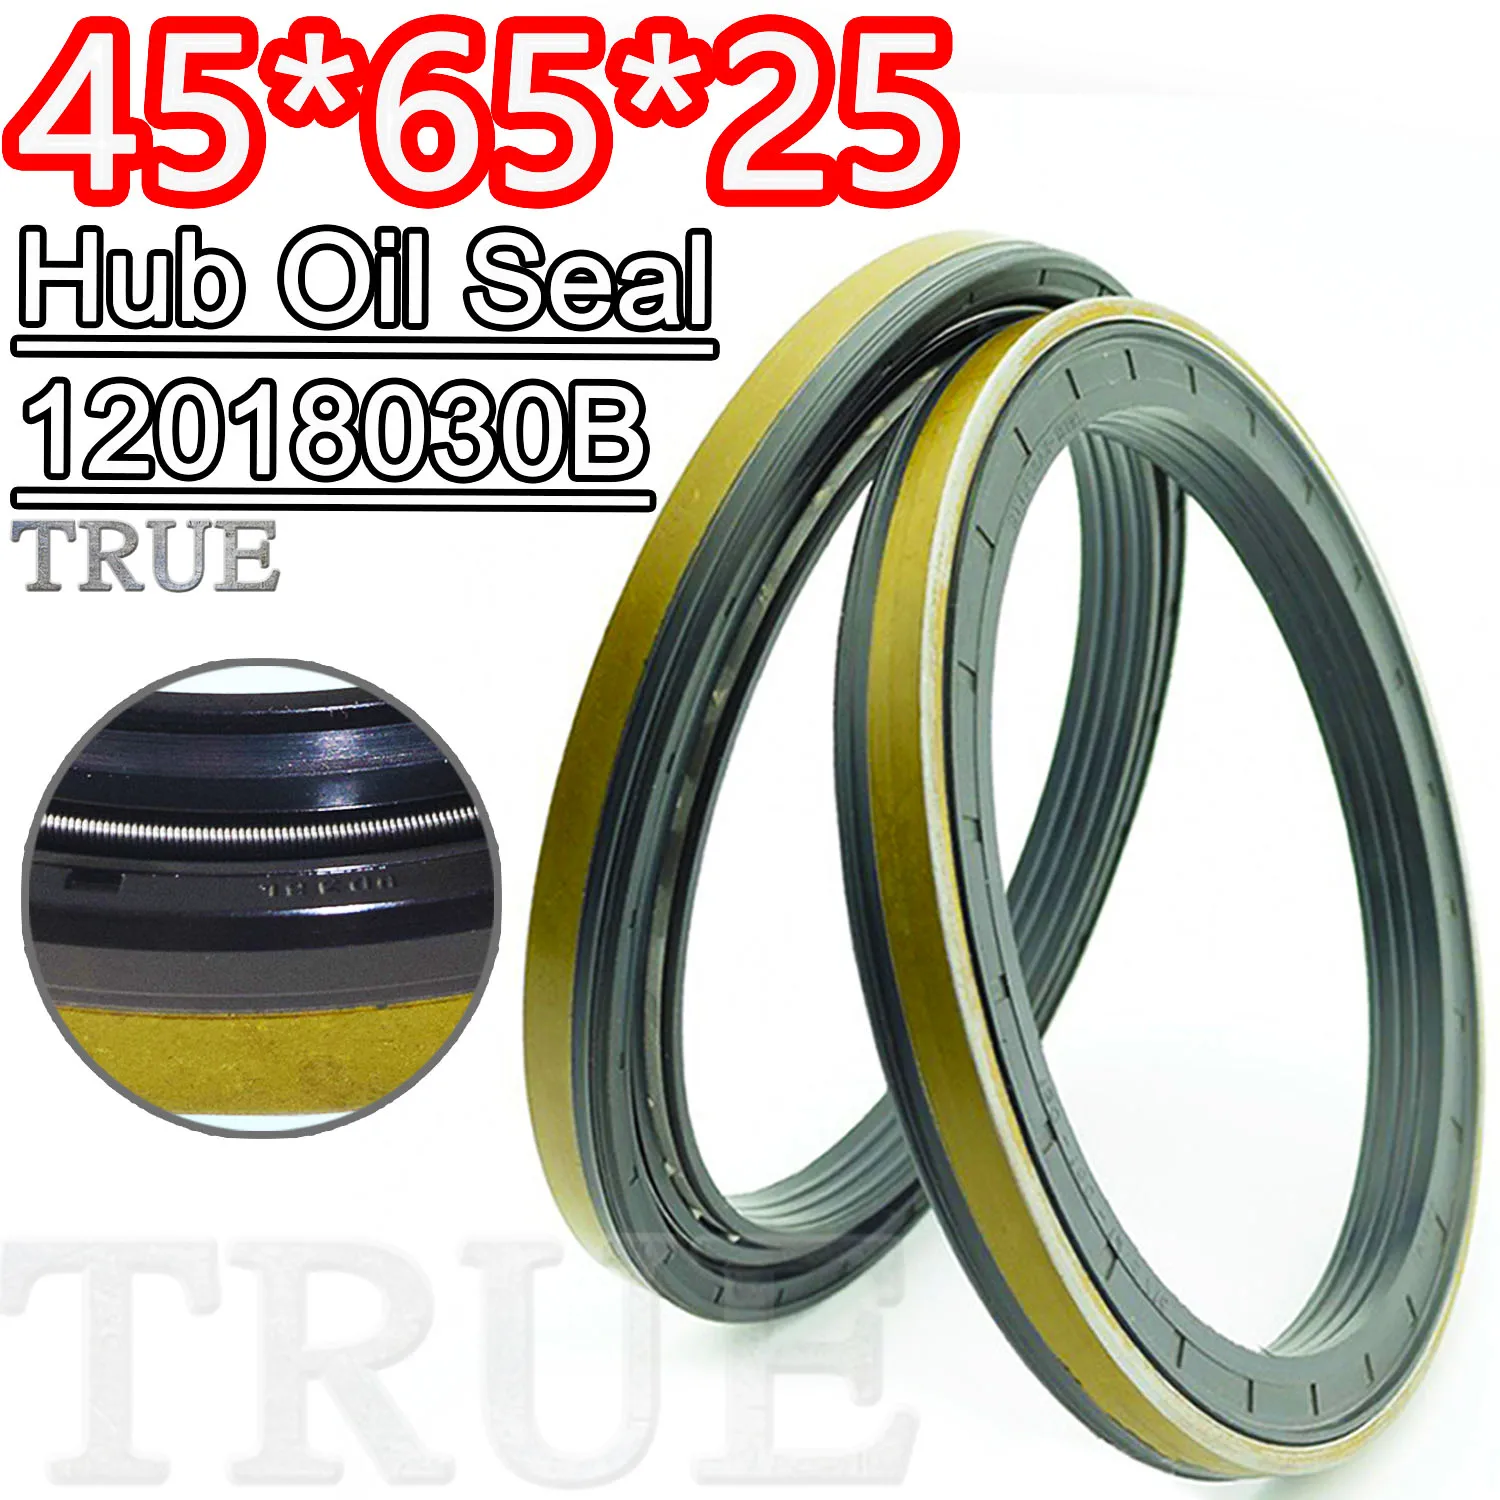 

Hub Oil Seal 45*65*25 For Tractor Cat 12018030B 45X65X25 Tool Set Pack ISO 9001:2008 Shaft Motor FKM Combined New Holland AG